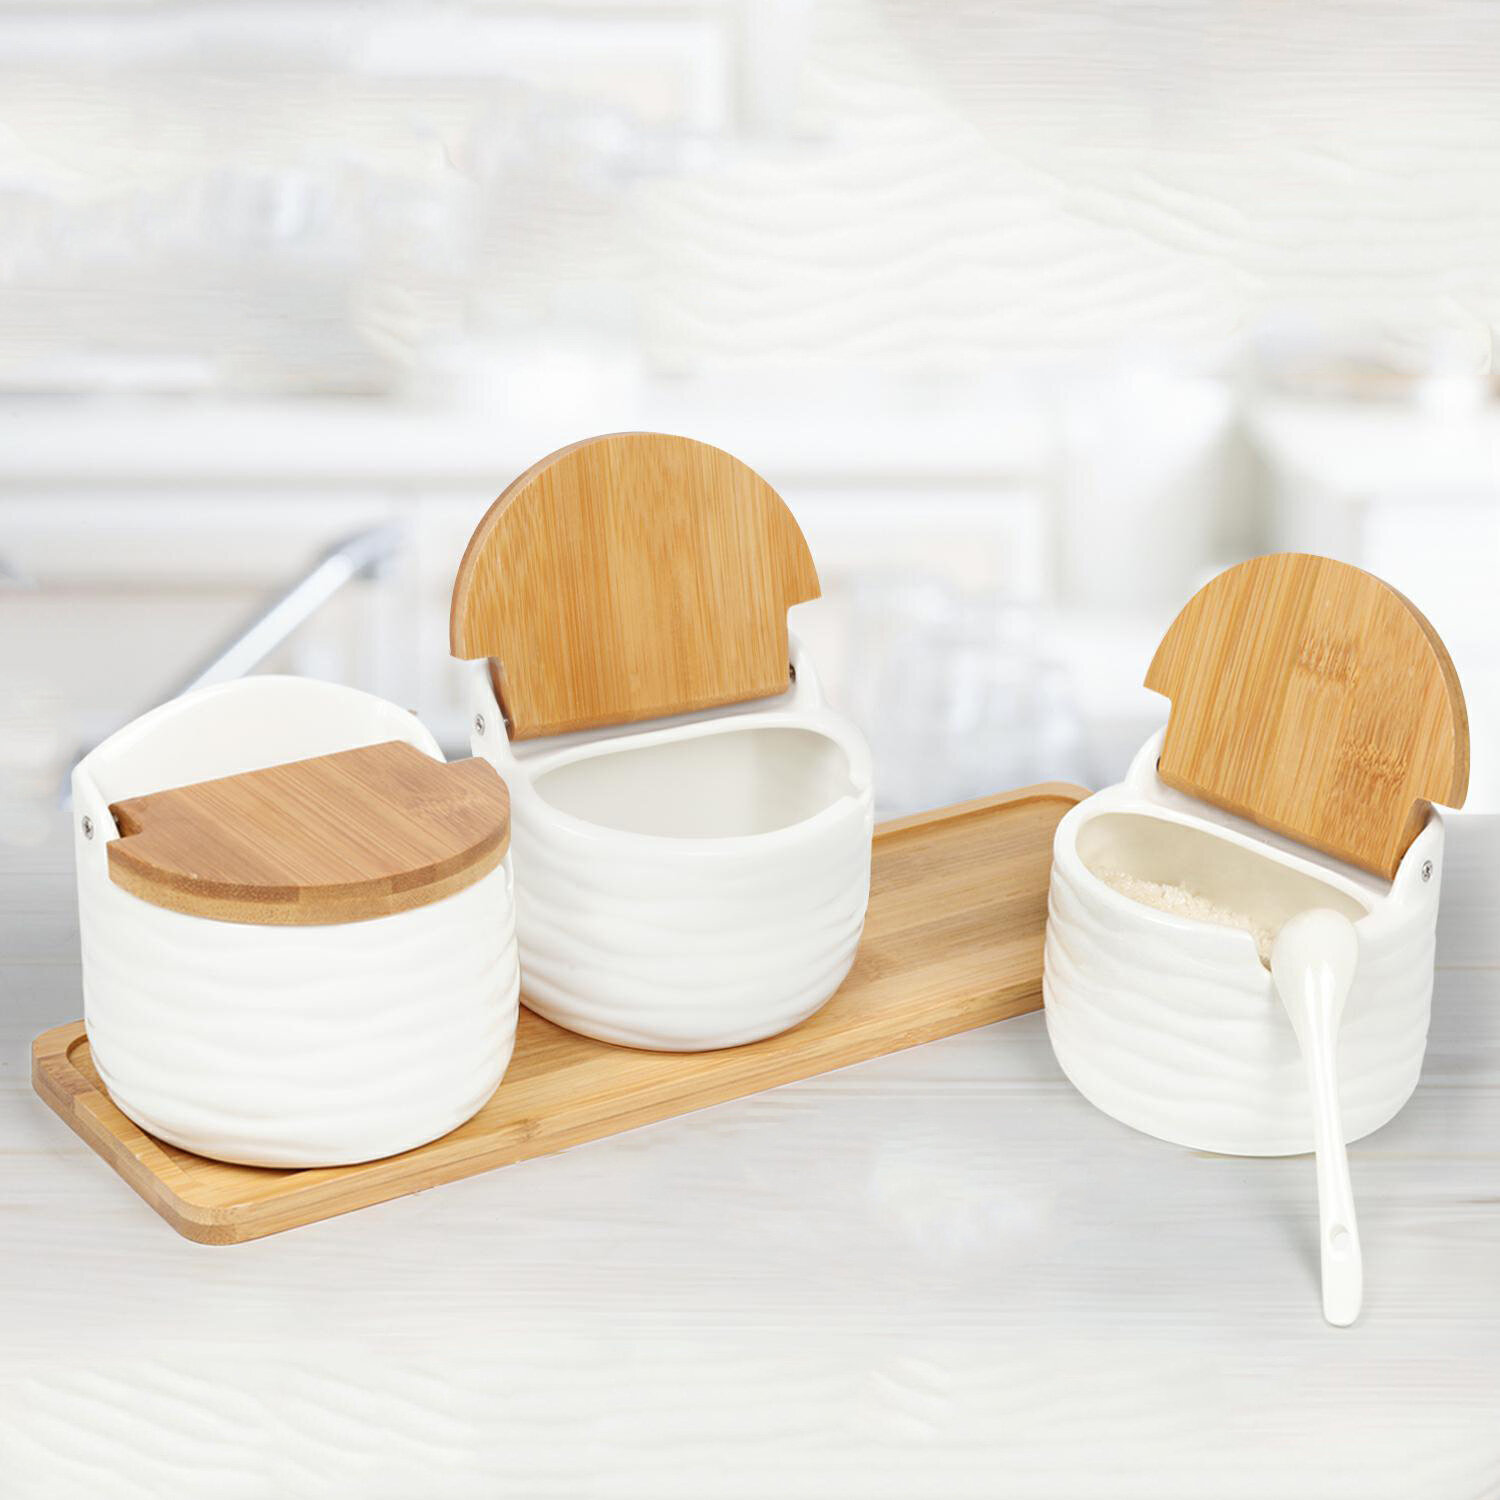 Ceramic Sugar Bowls Set of 3 Condiment Jar Spice Container with Bamboo Lids and Spoon Seasoning Pots CELLPAK